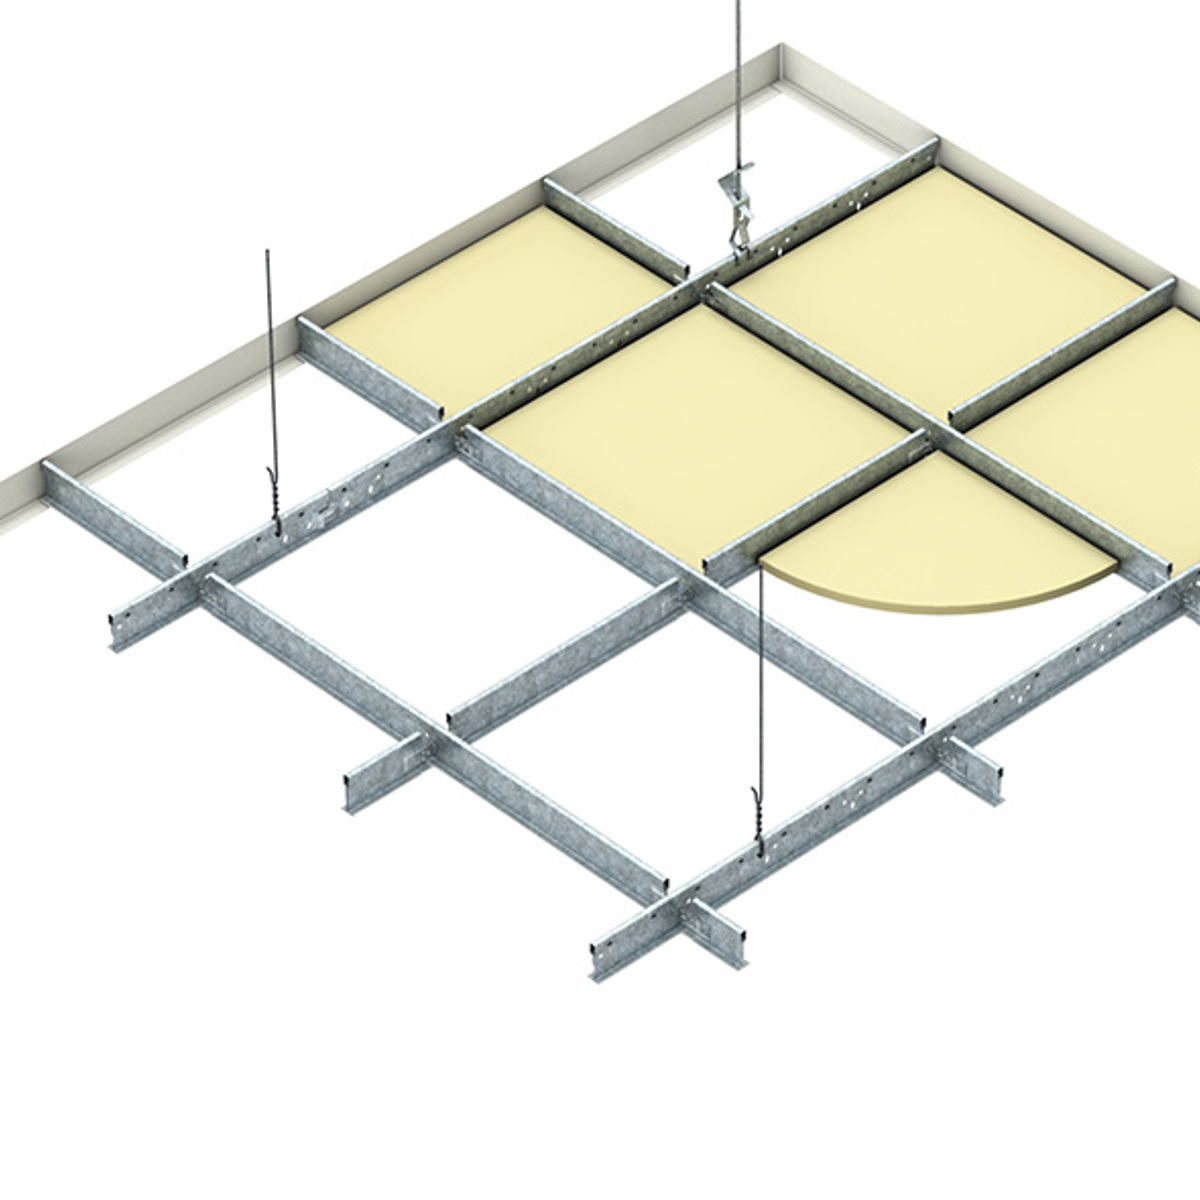 Donn Exposed Grid Ceiling System Rondo